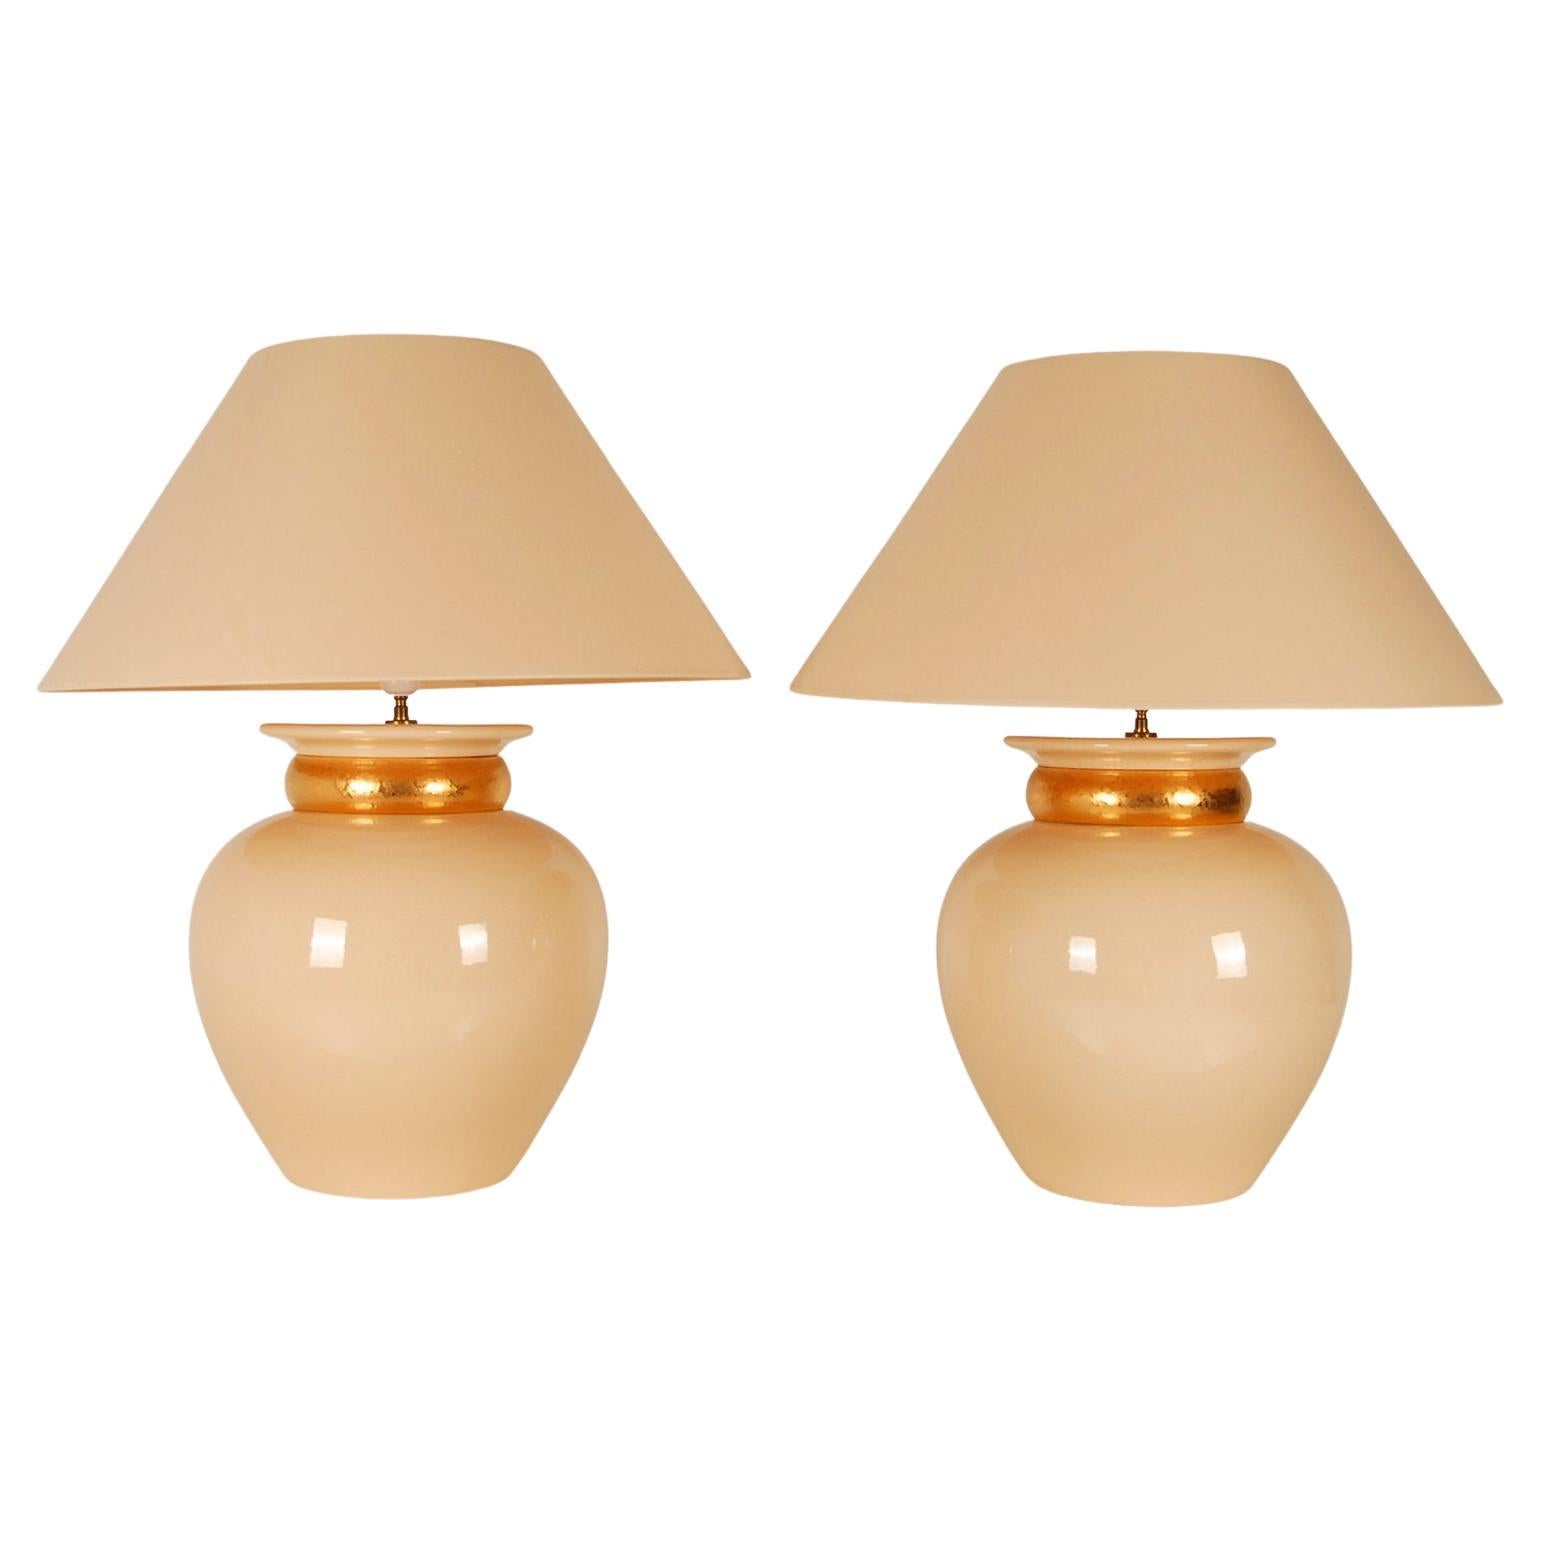 Vintage French Ceramic Robert Kostka Table Lamps Gold and Beige  - a Pair